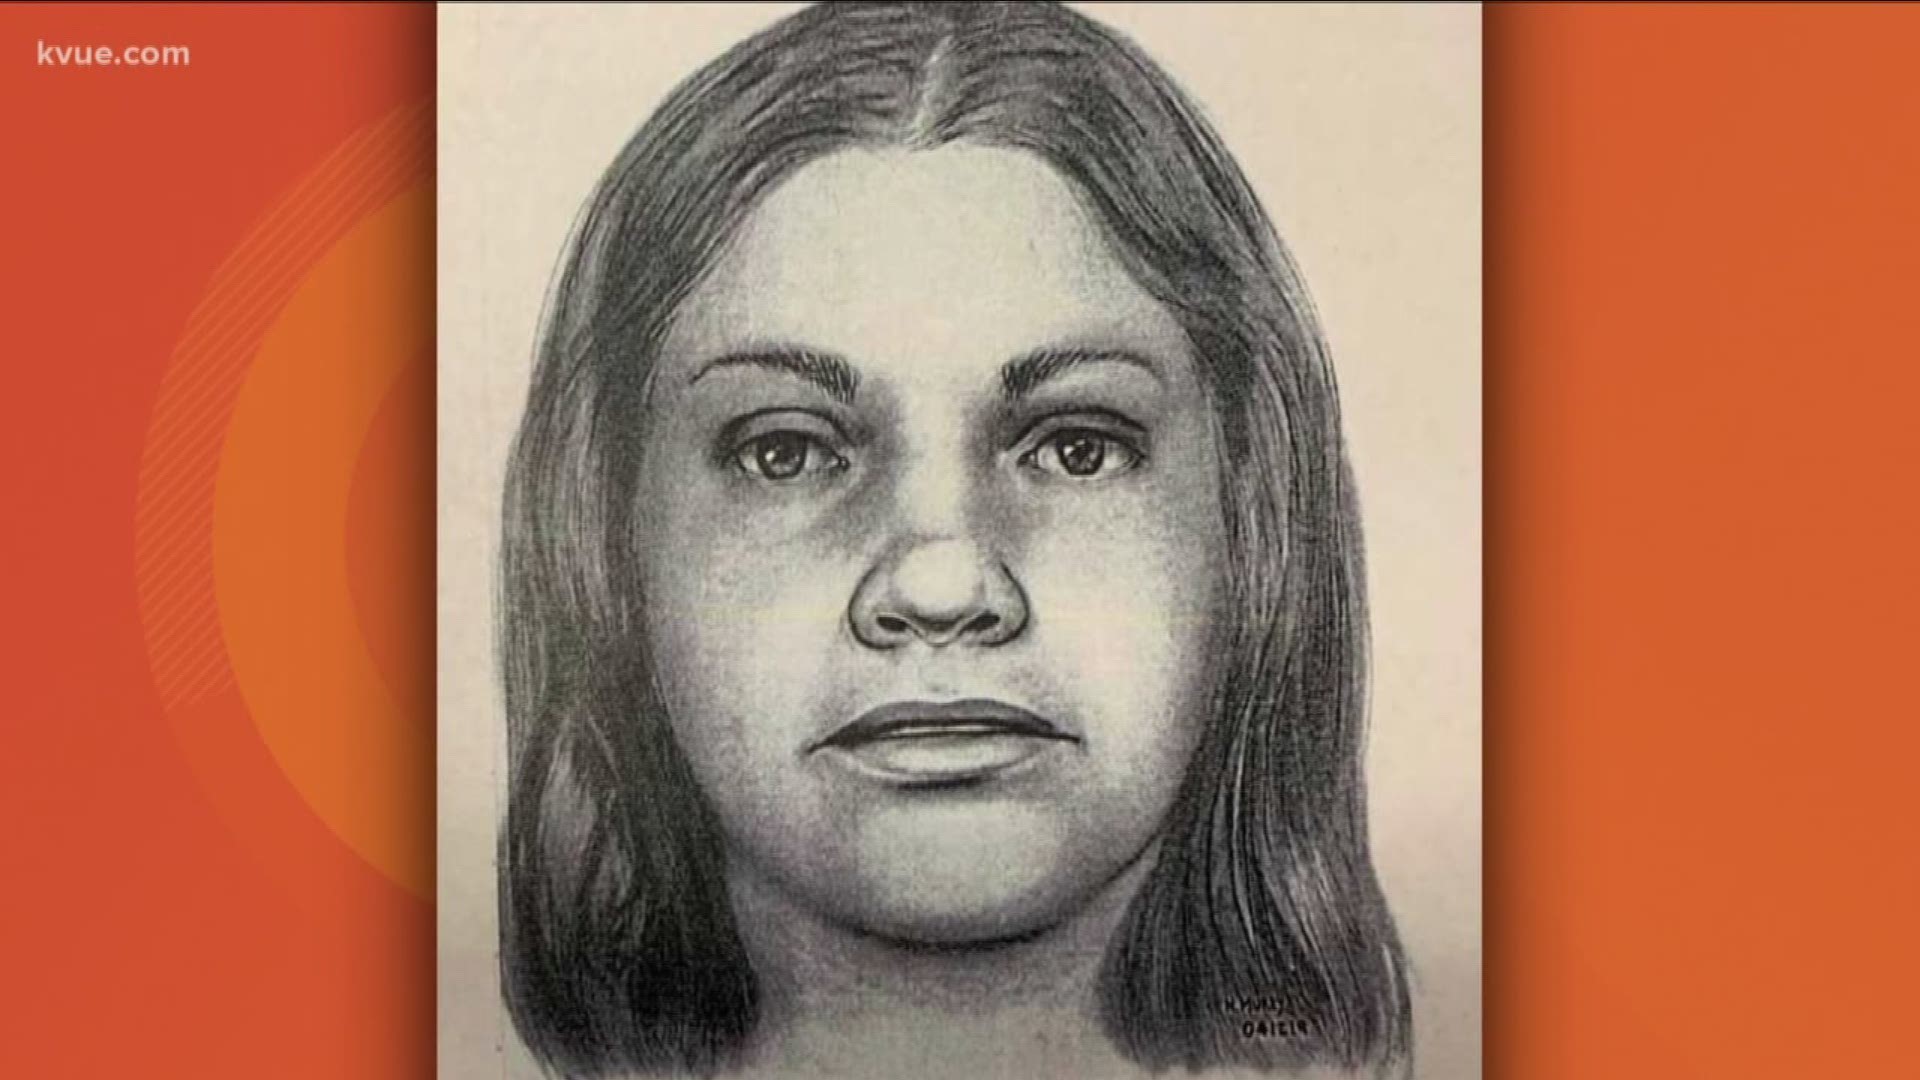 Since 1979, she's been known only as "Orange Socks." Now authorities have uncovered her identity.